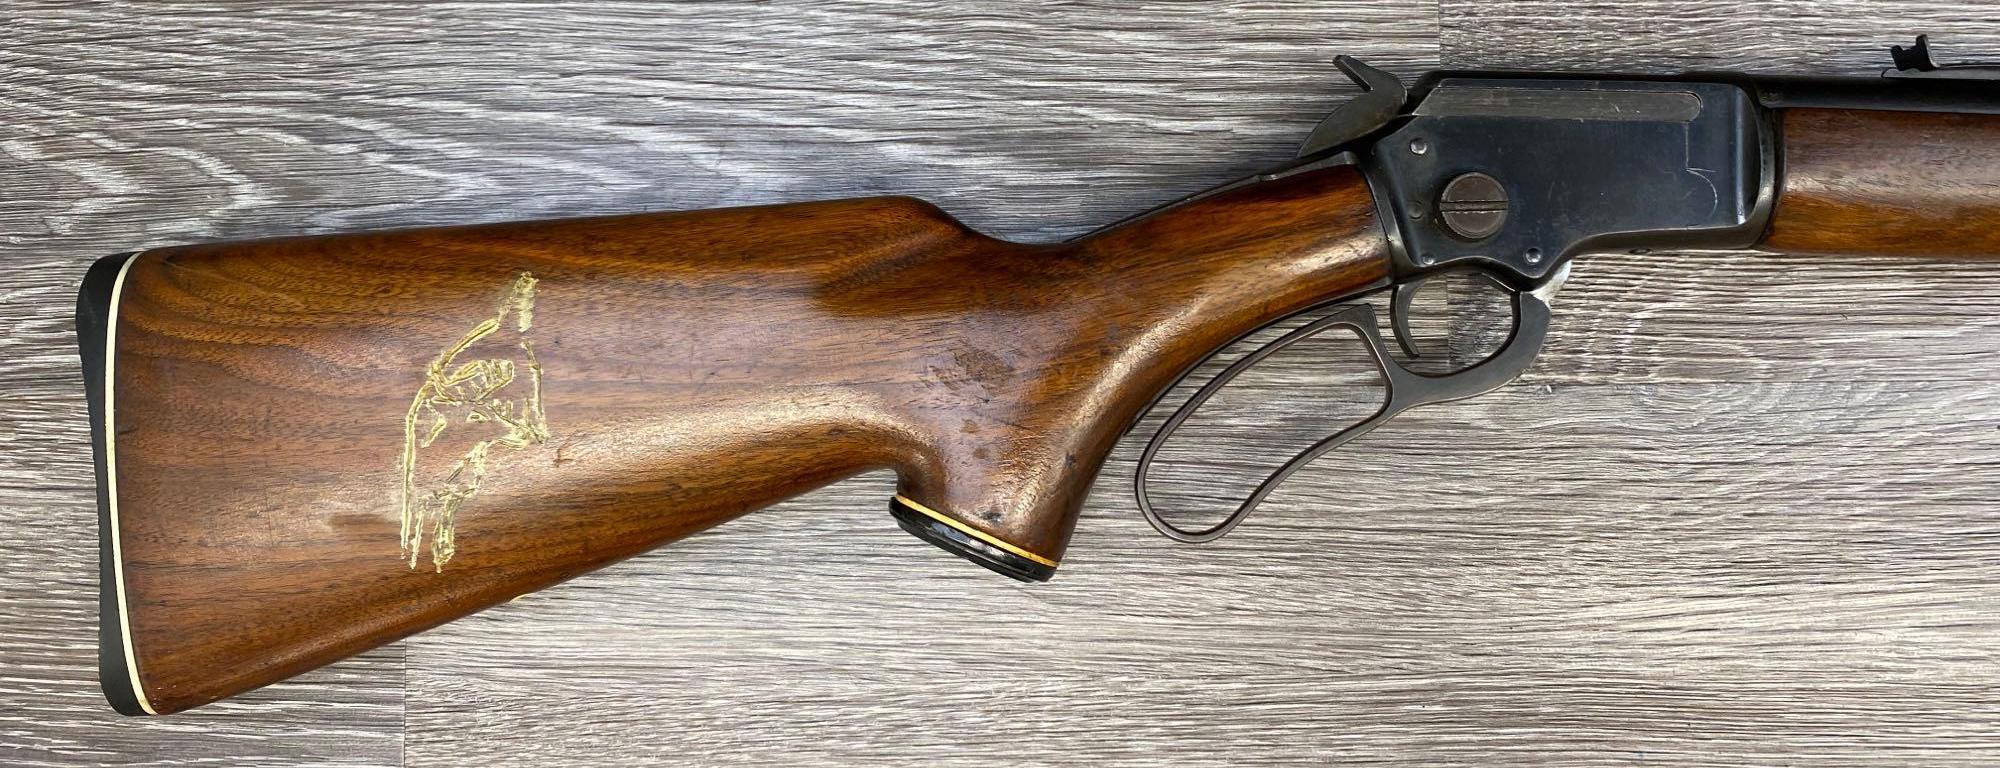 MARLIN MODEL 39-A LEVER ACTION TAKEDOWN RIFLE .22 S, L OR LR CAL